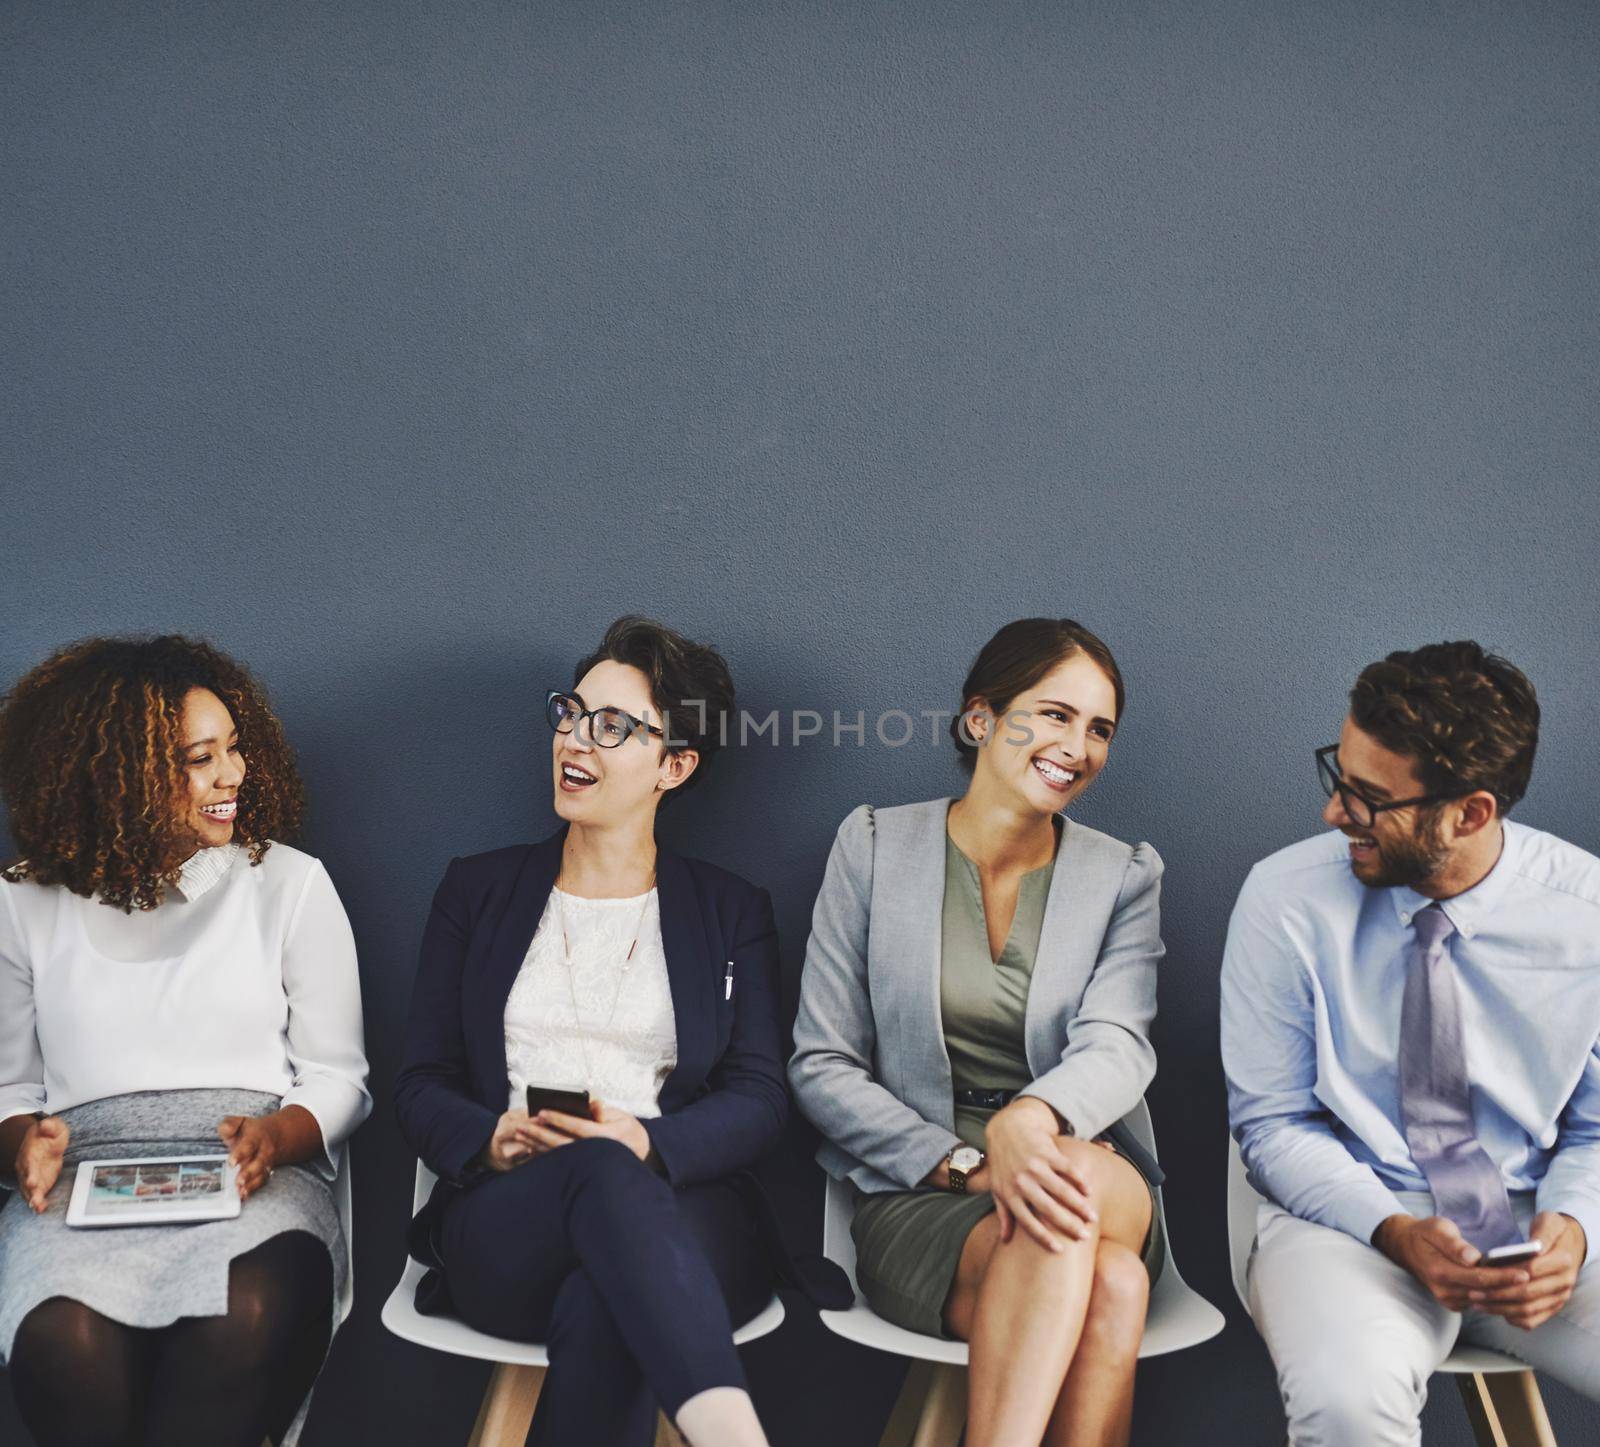 Waiting for an interview, connected, communication and network of diverse businesspeople using multimedia technology. Happy professional group sitting in a row, applying for an International job.